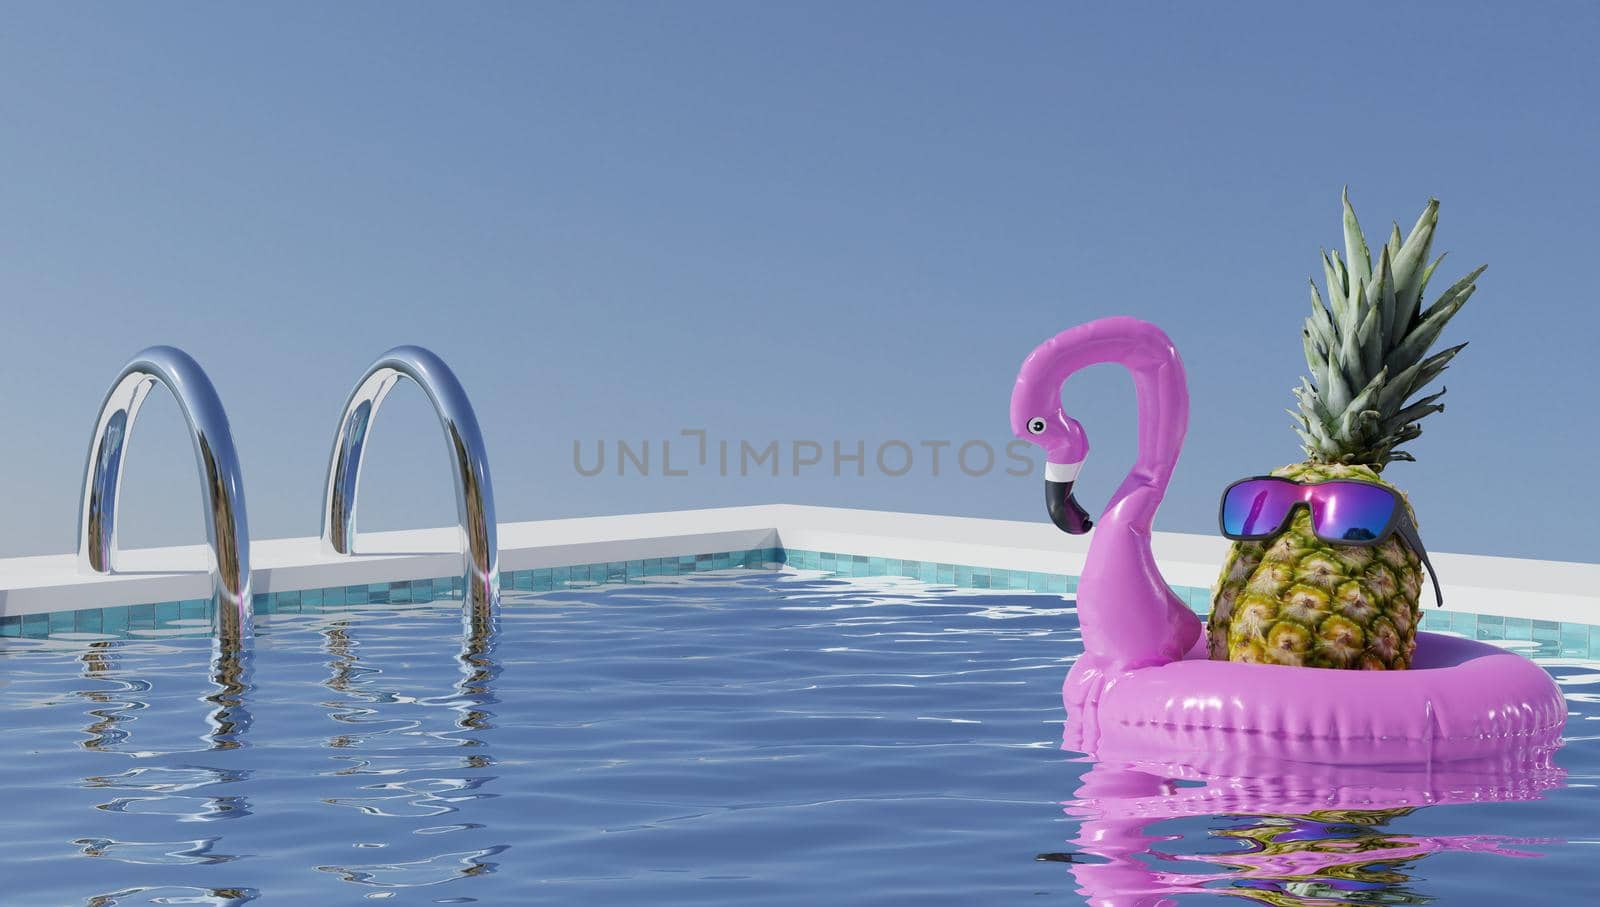 Summer Vacation and Swimming Pool Relaxation Lifestyles Concept, Pineapple With Sunglasses in Poolside at The Beach Vacations. Tropical Leisure Activities Relaxing and Holiday Resort. 3d rendering. by jbruiz78